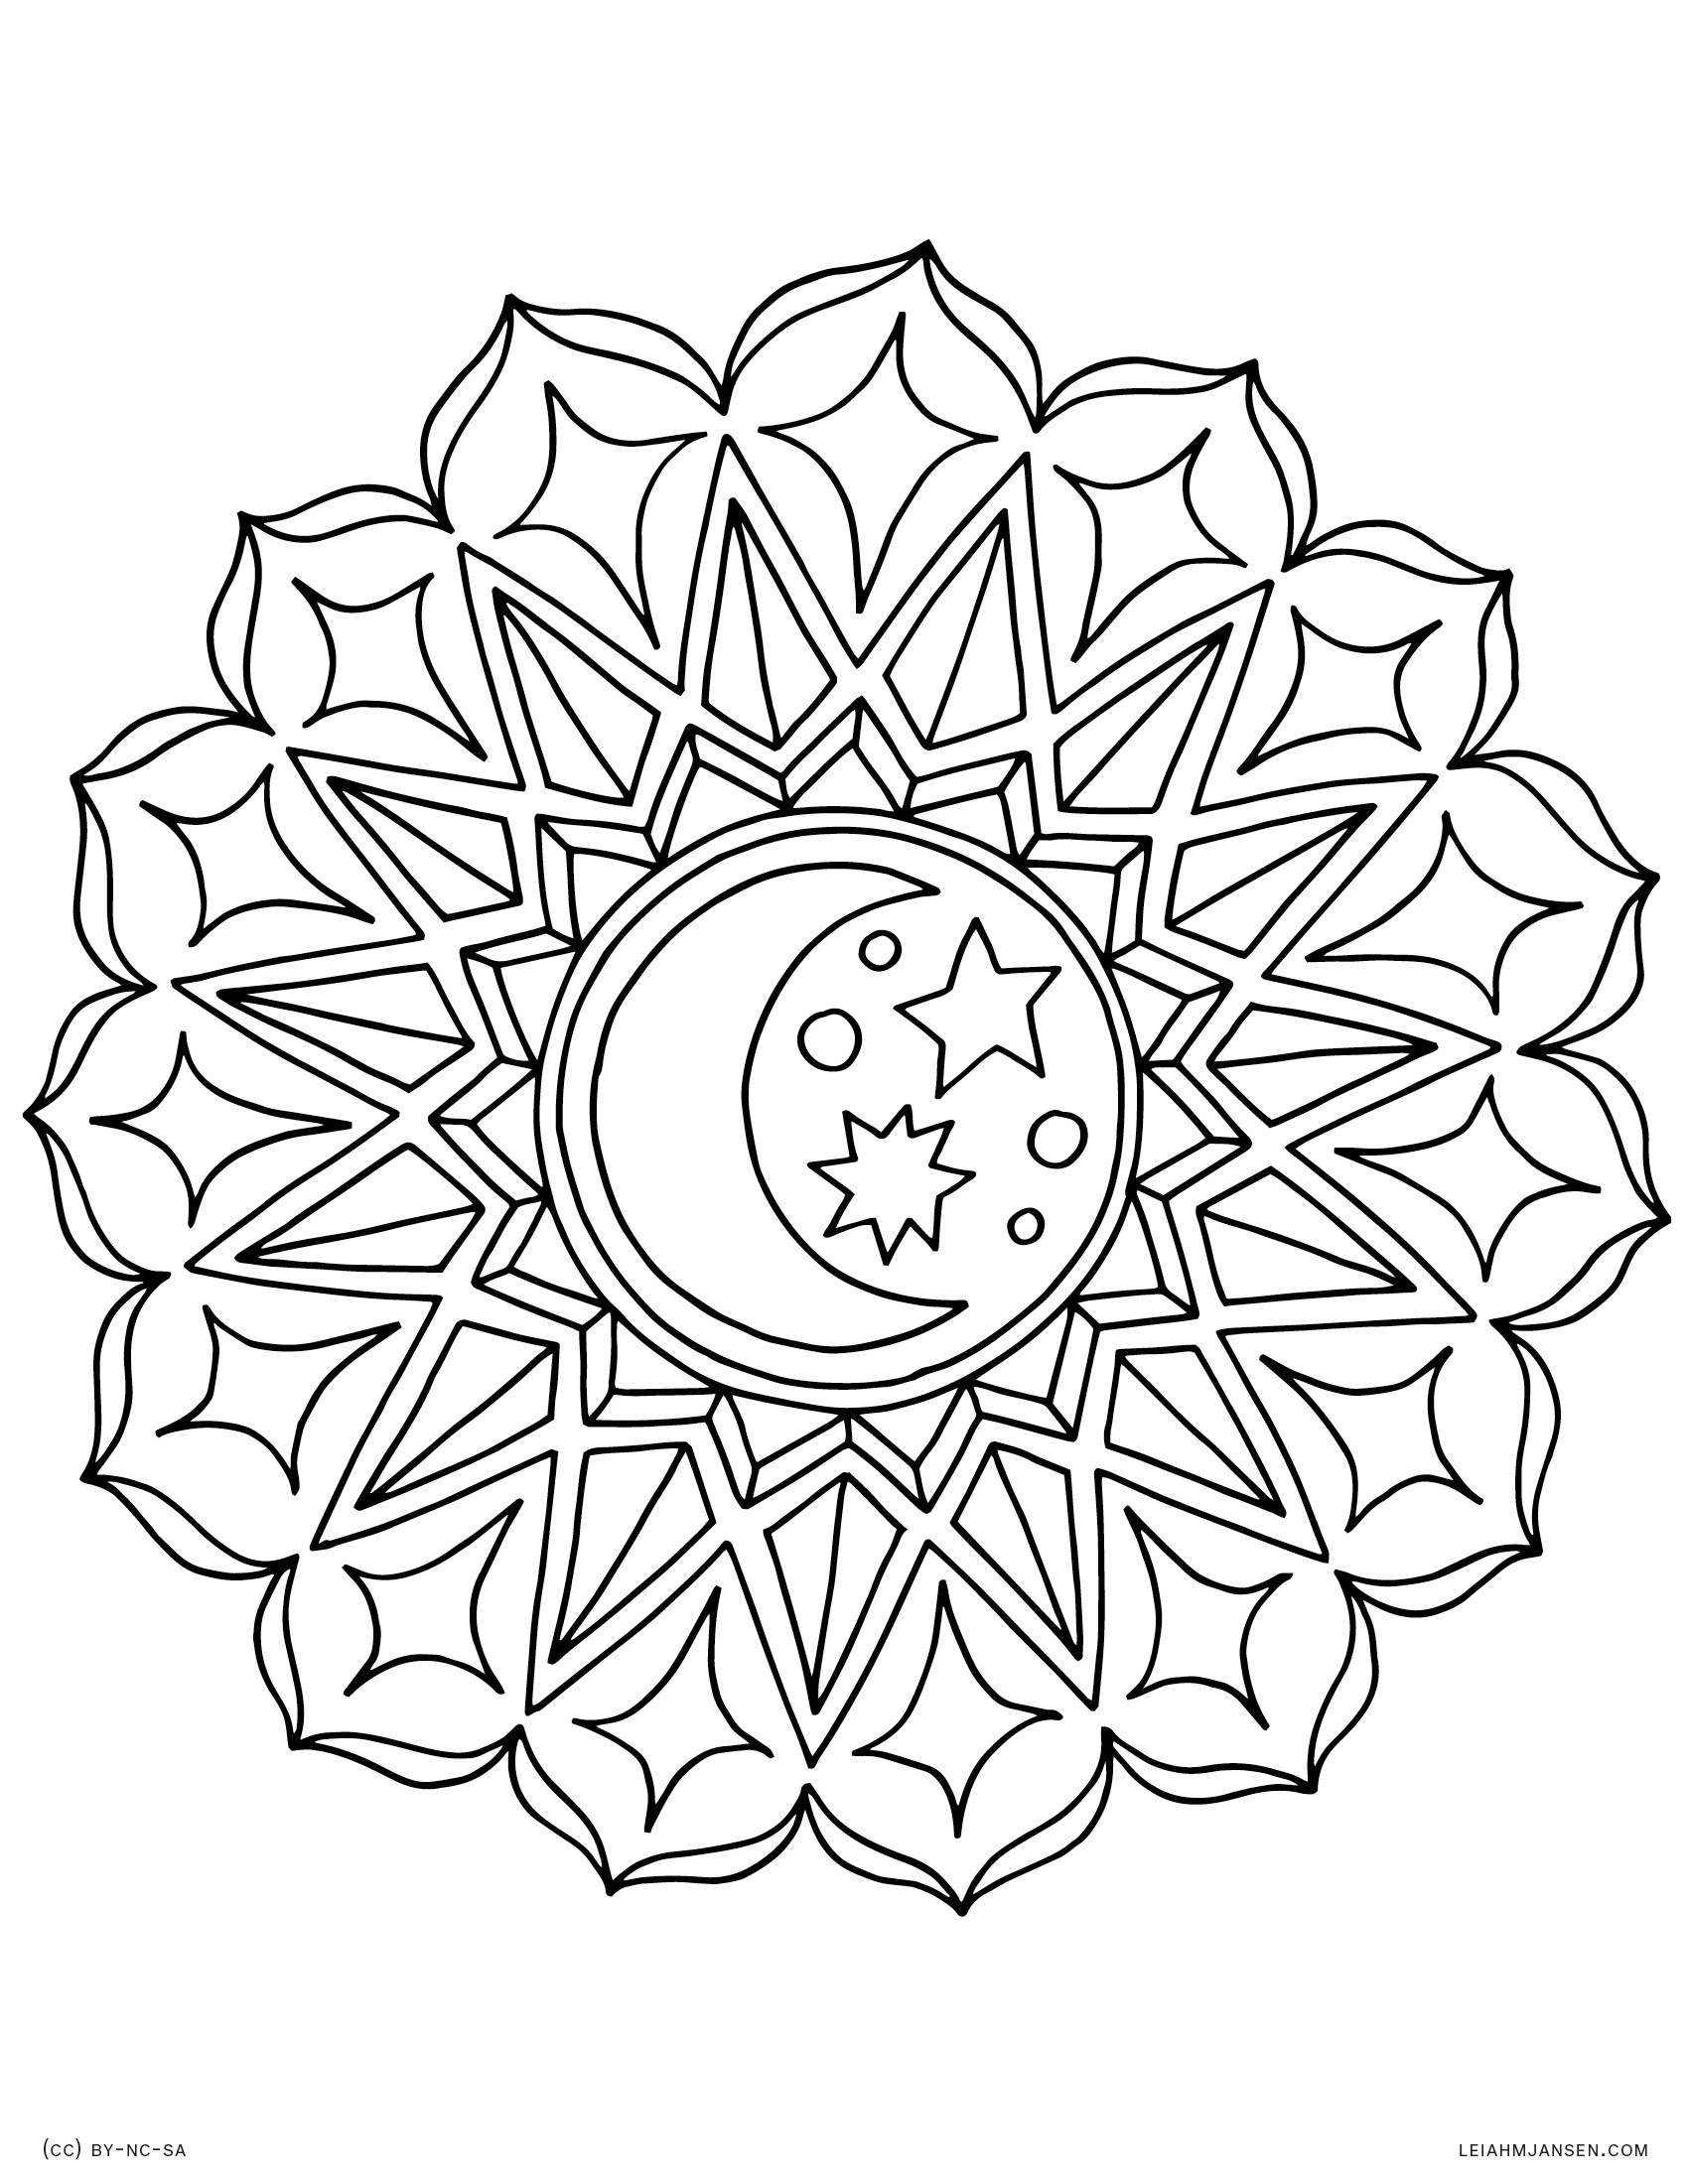 Mandala Coloring Pages Printable
 Coloring Pages